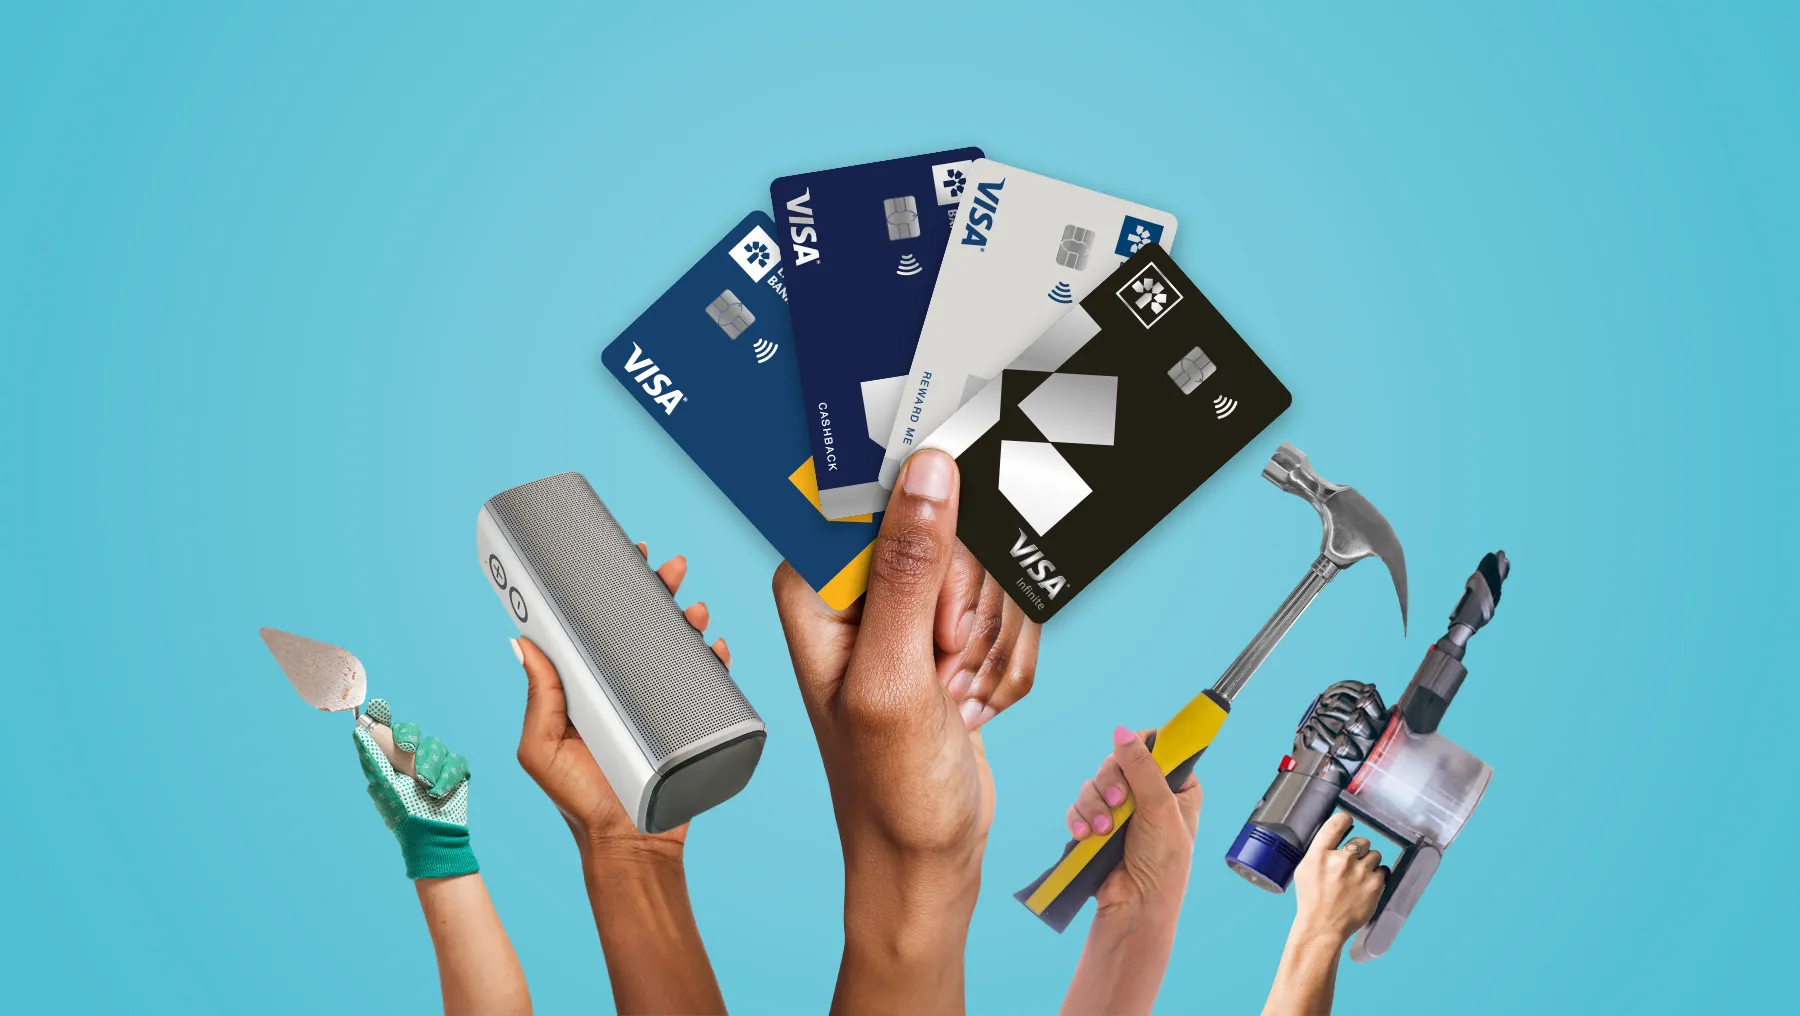 Close up of 5 raised hands. 4 hands are holding up different tools and the hand in the middle is holding up 4 fanned out Laurentian Bank credit cards.